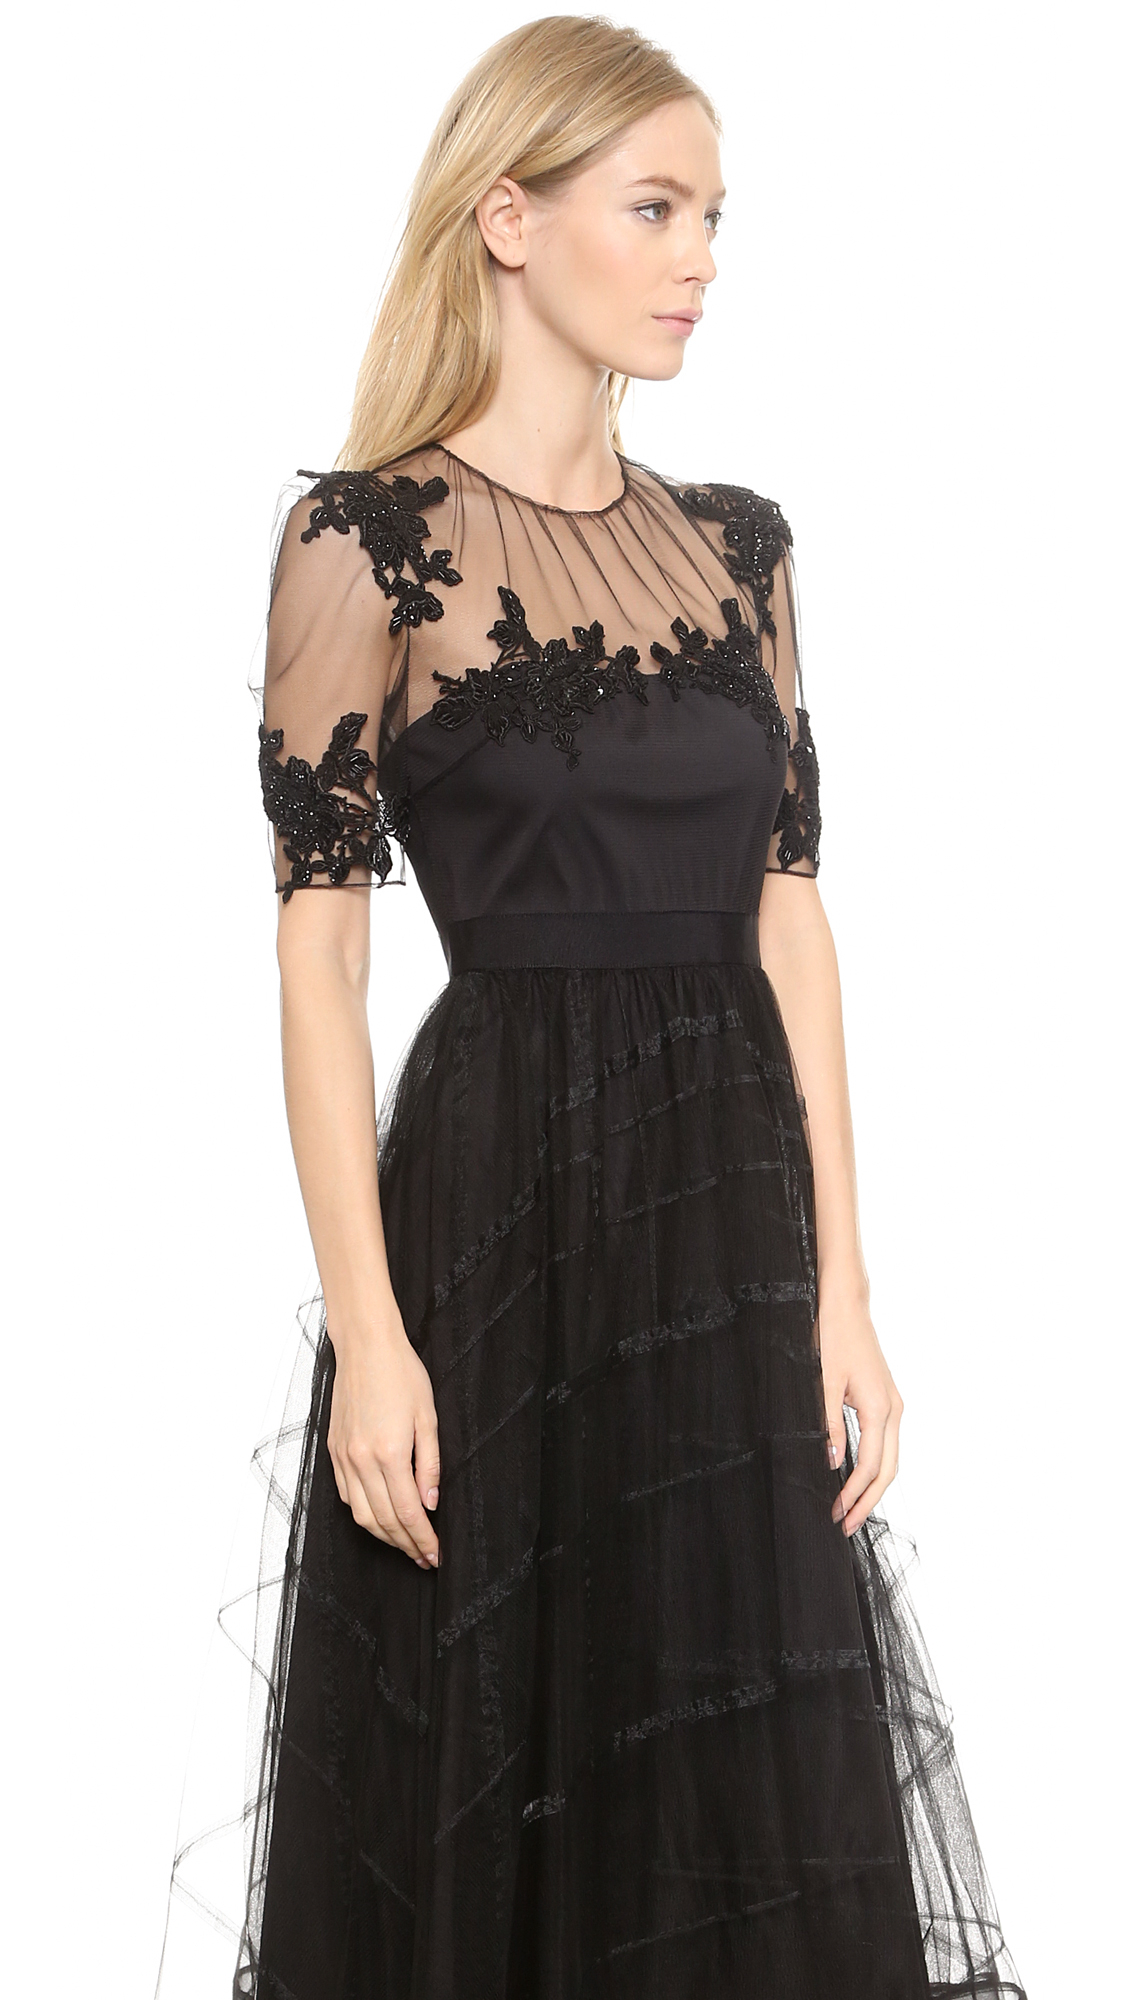 Notte by marchesa Tea Length Dress With Tulle Skirt - Black in Black | Lyst